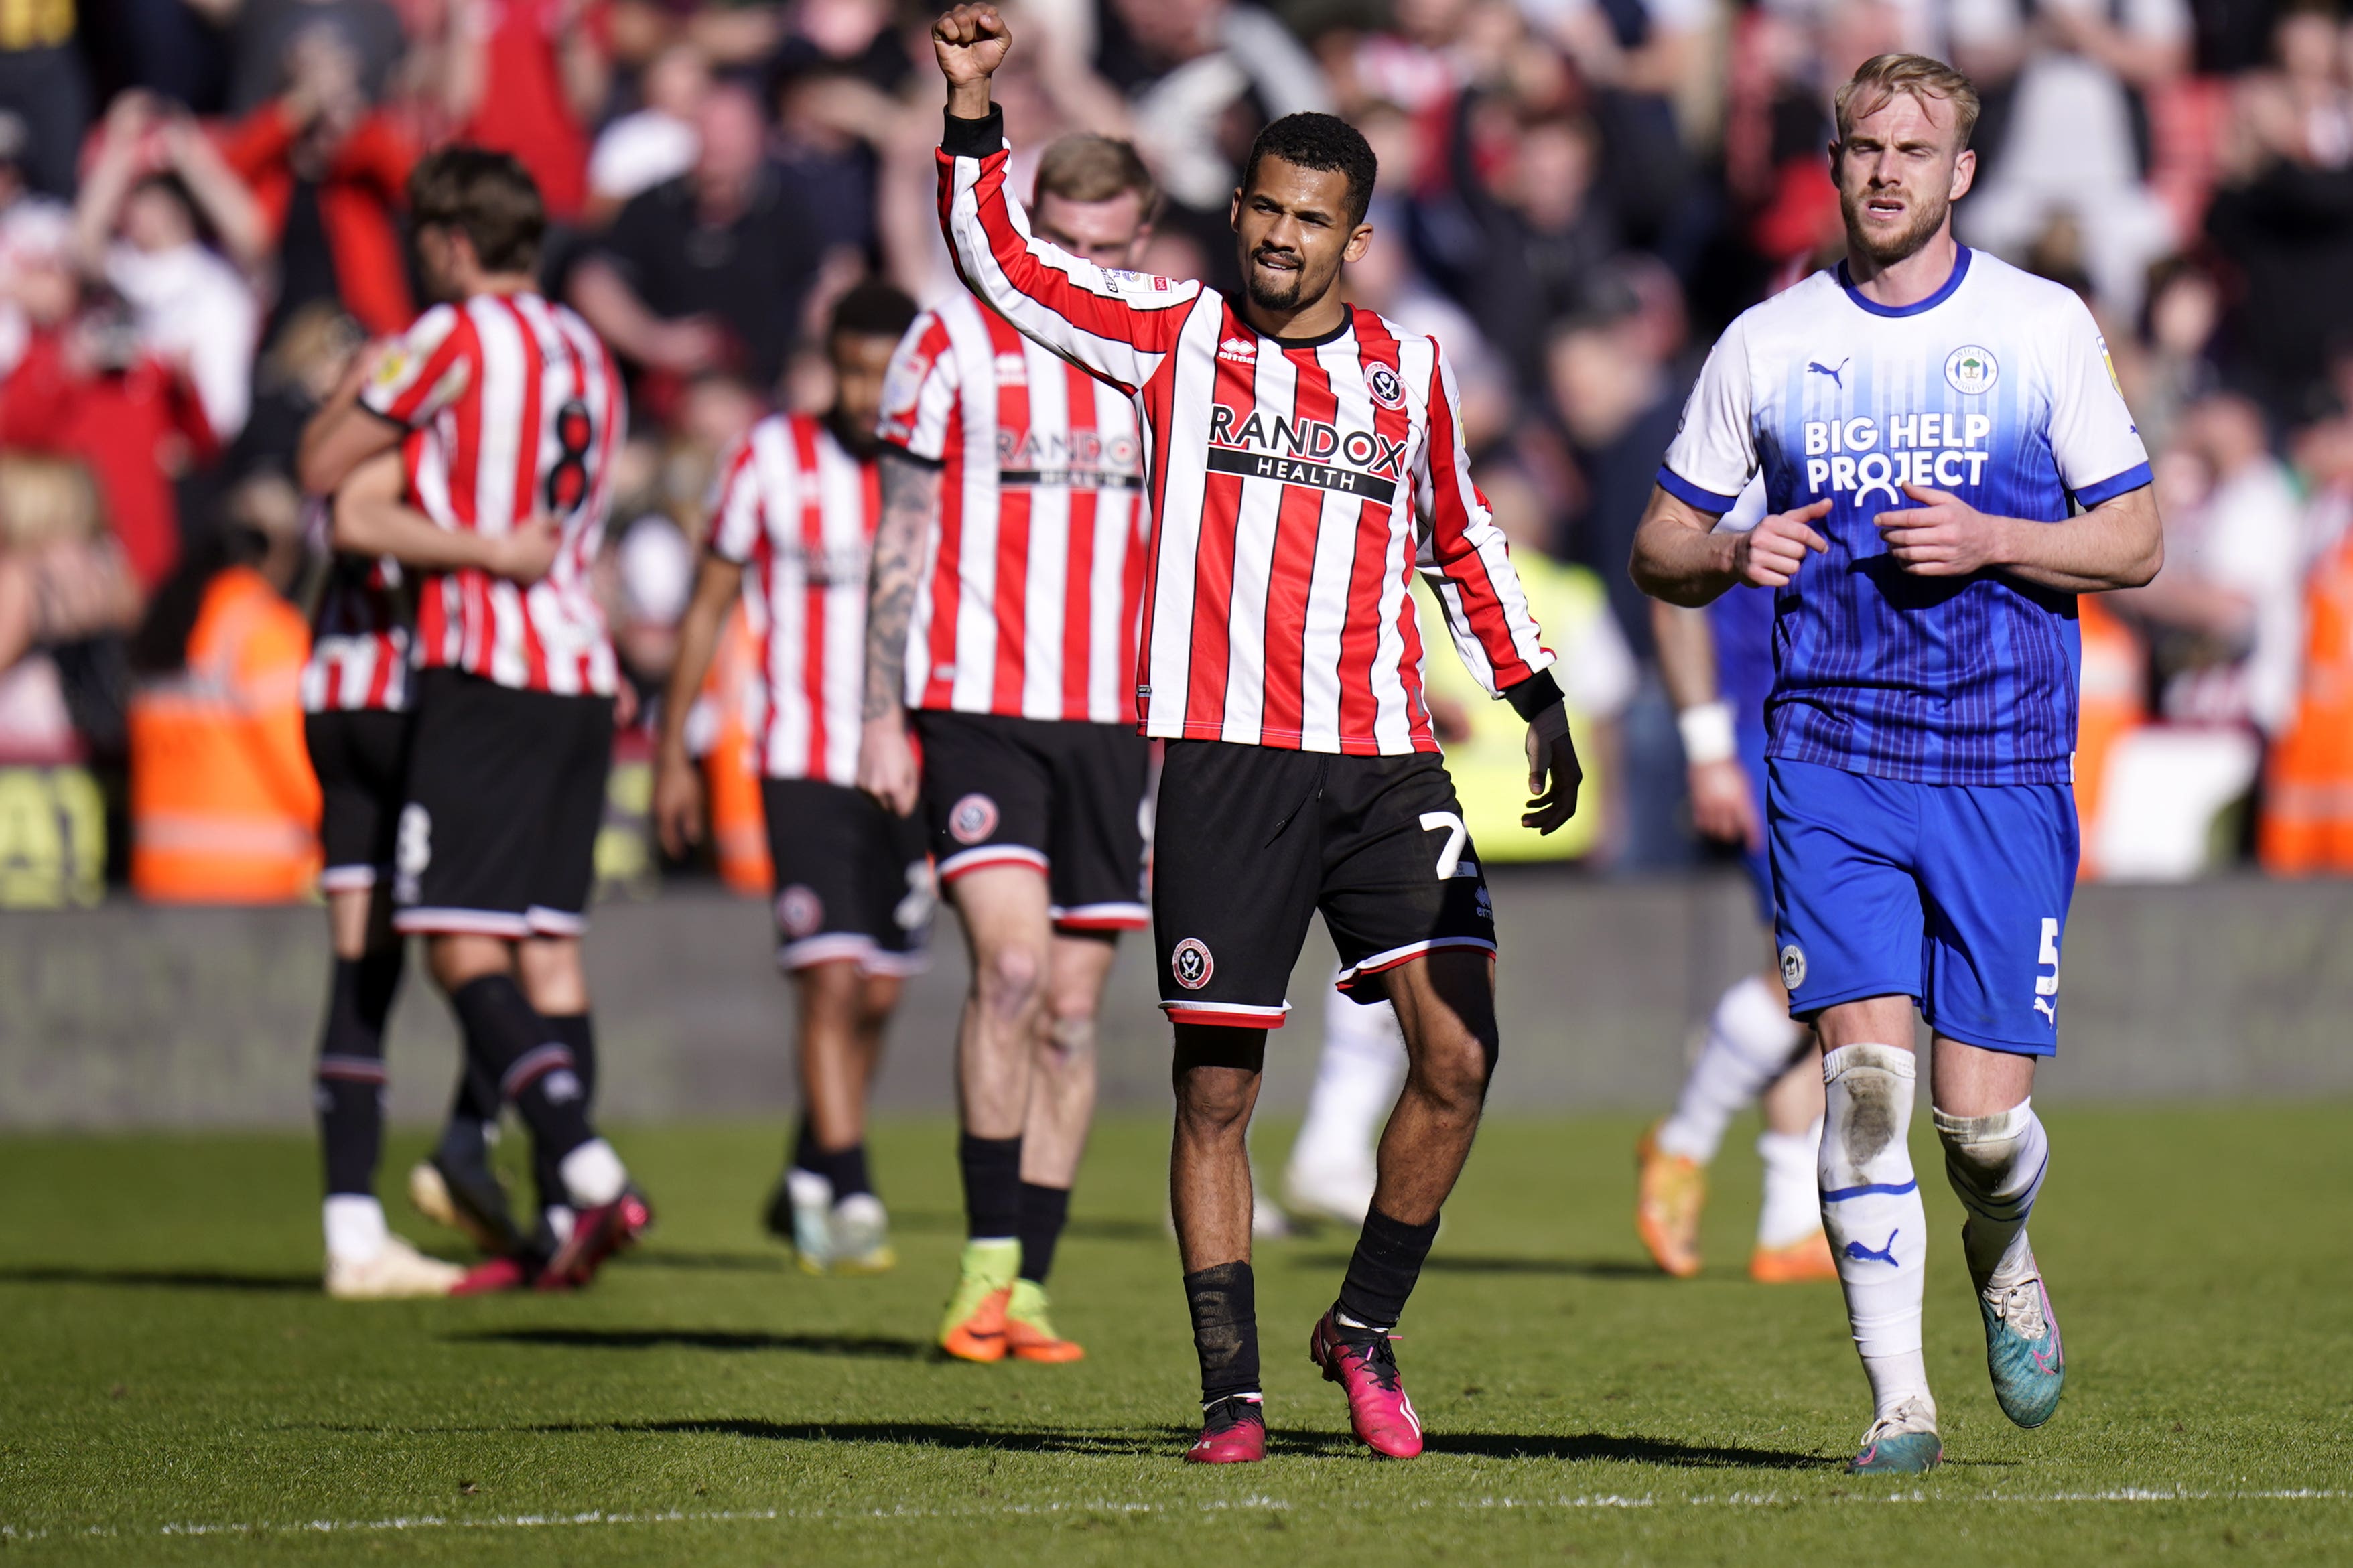 Iliman Ndiaye has been one of Sheffield United’s star players (Danny Lawson/PA)